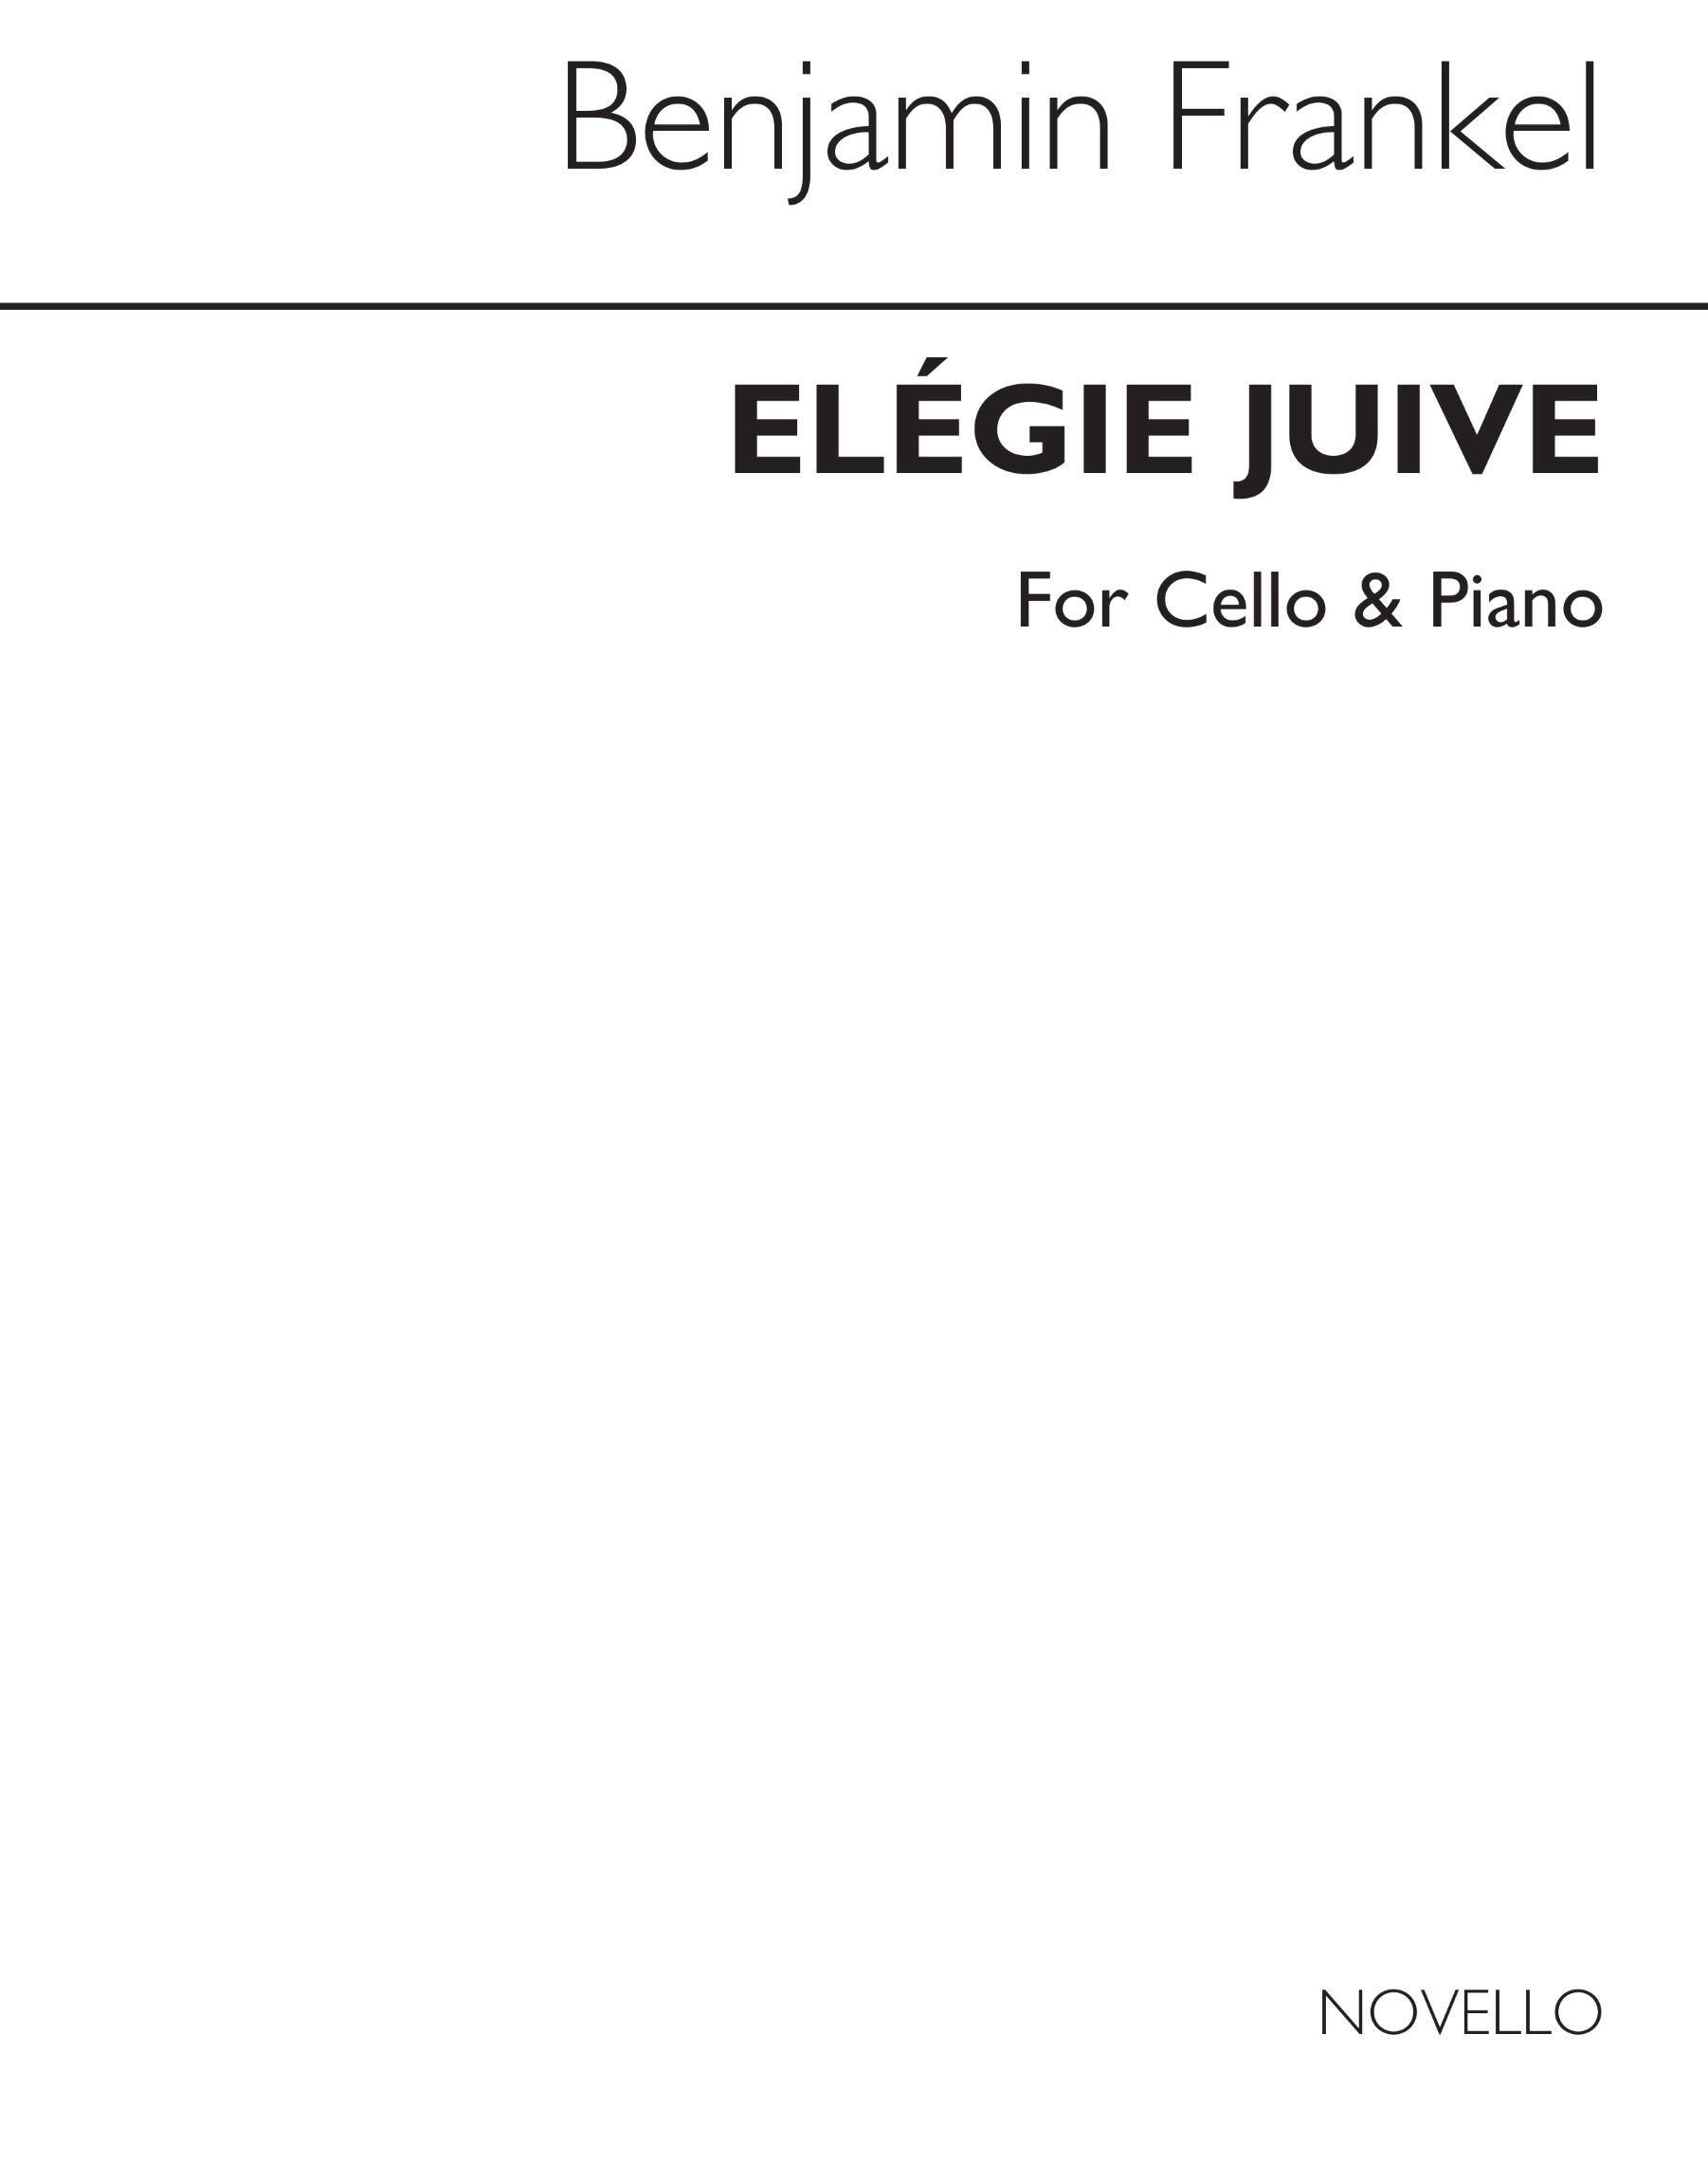 Elegie Juive for Cello and Piano : photo 1